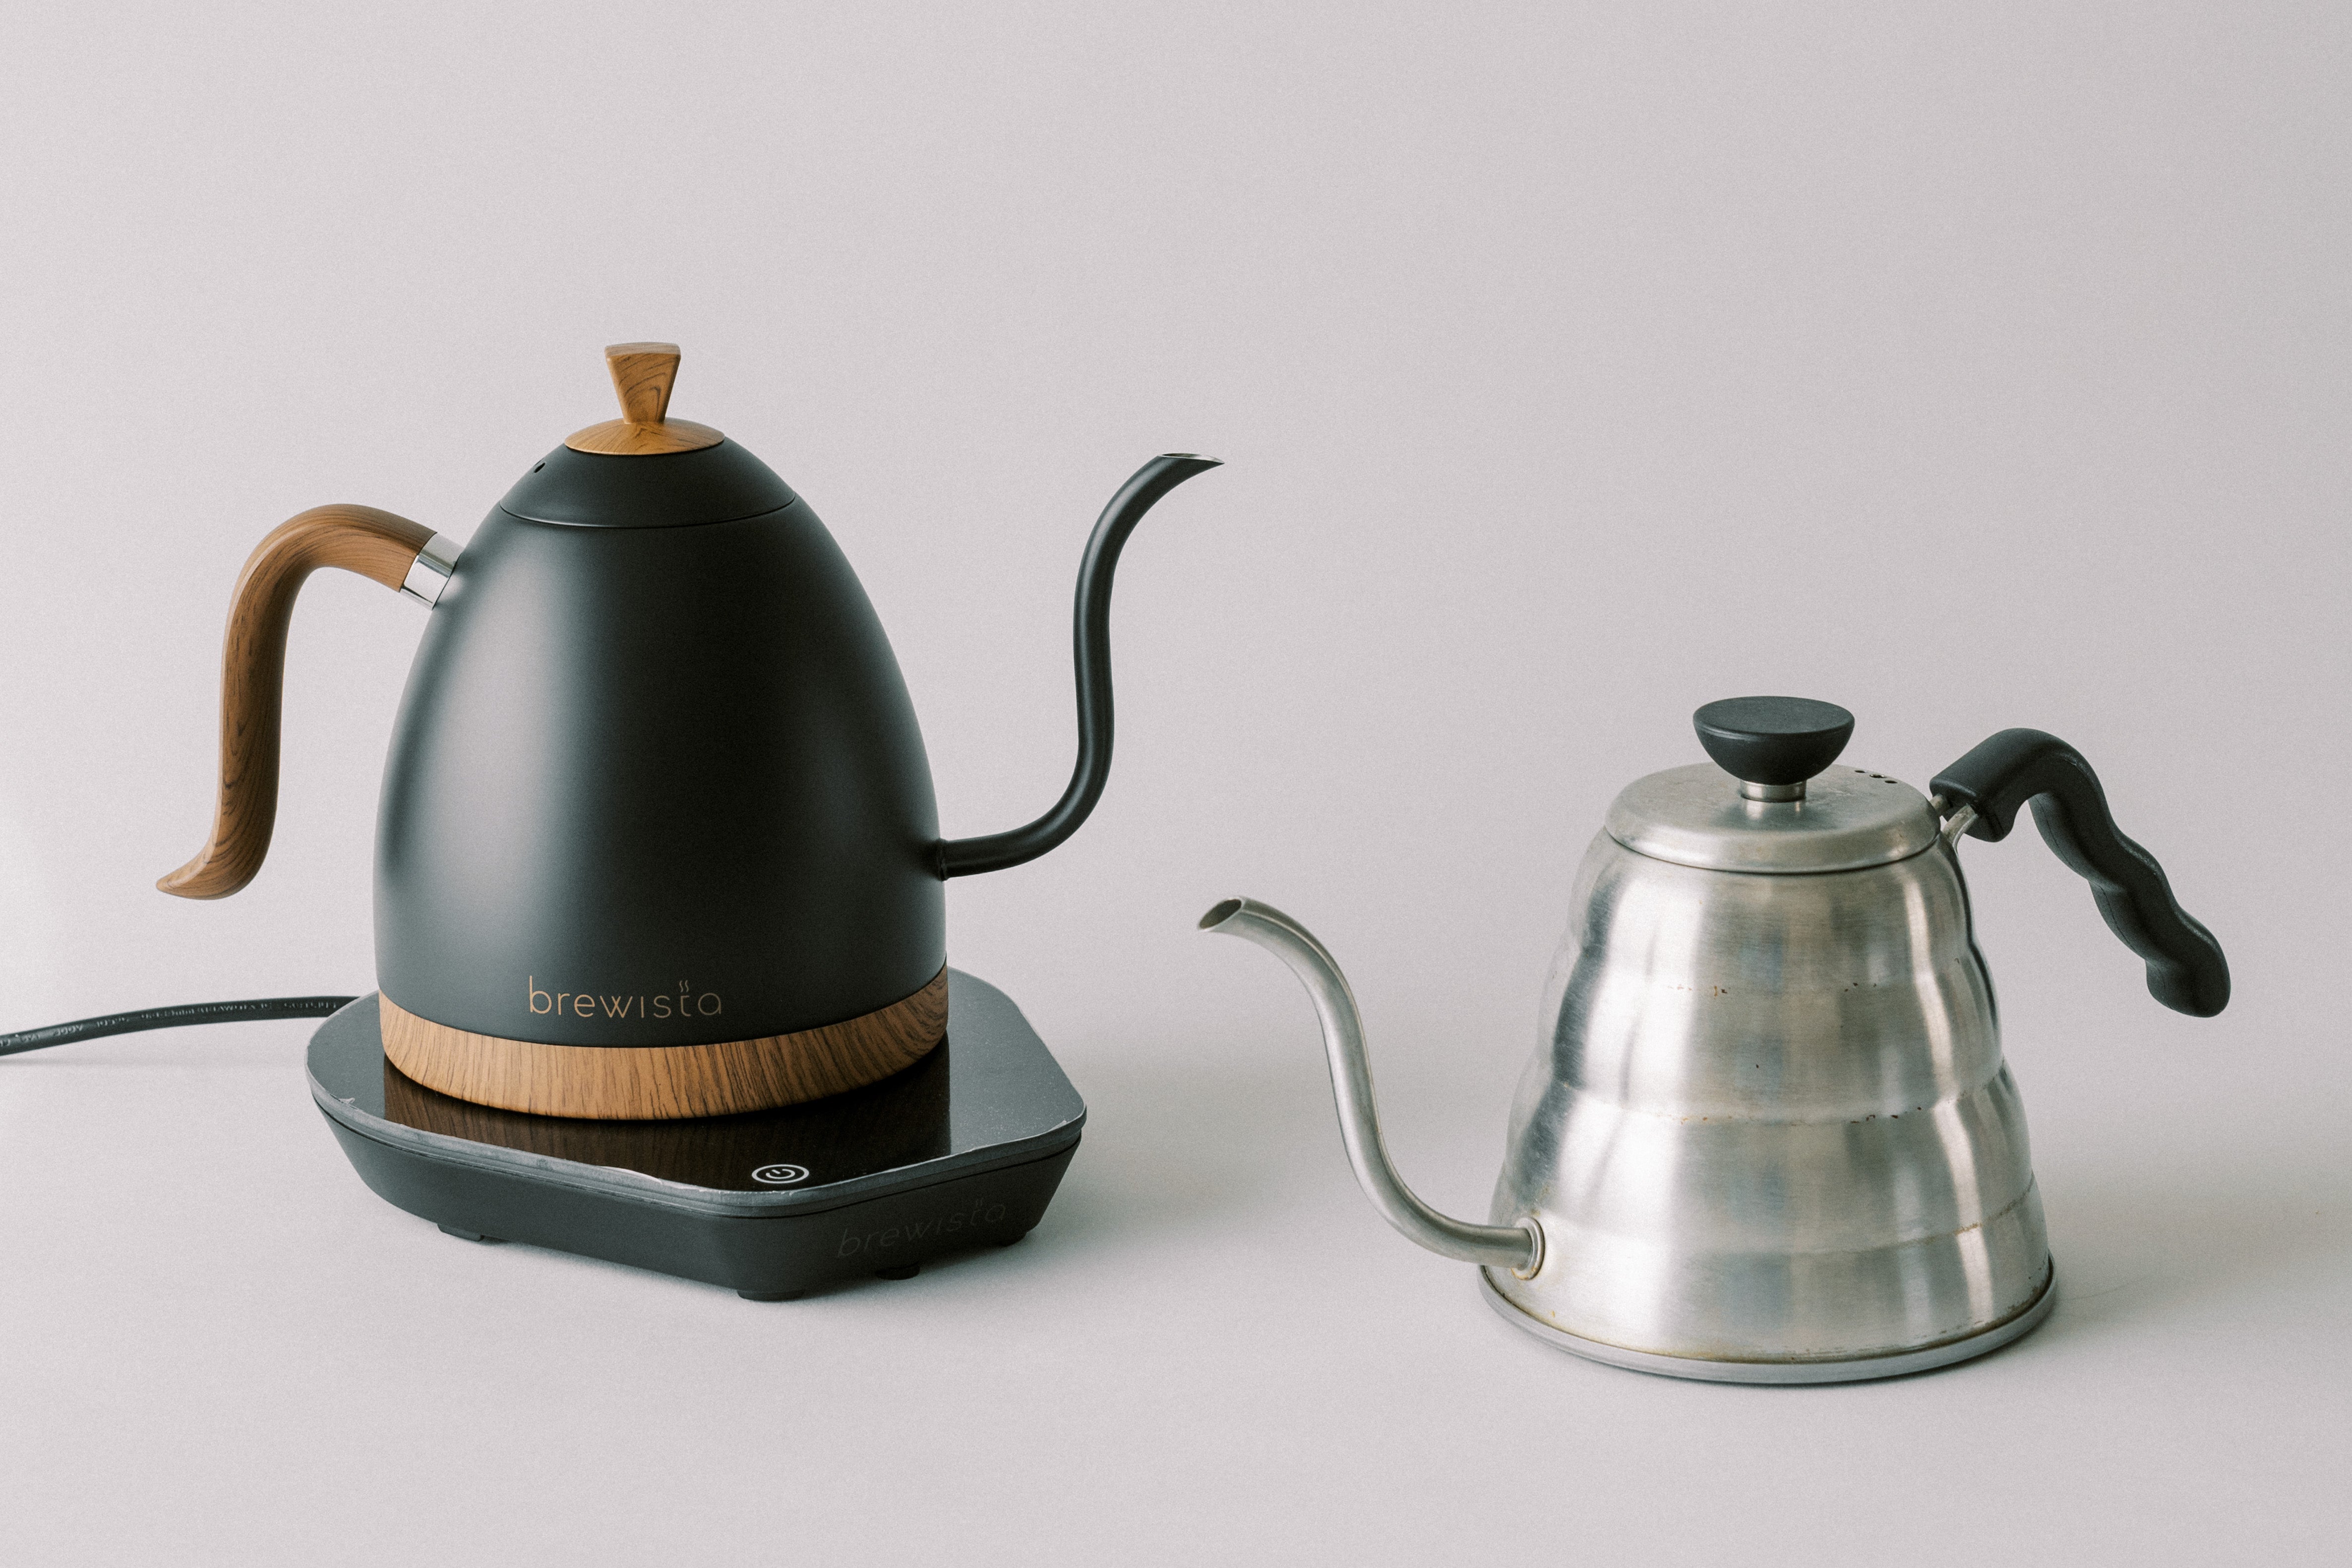 Pour Over Coffee Kettles Guide